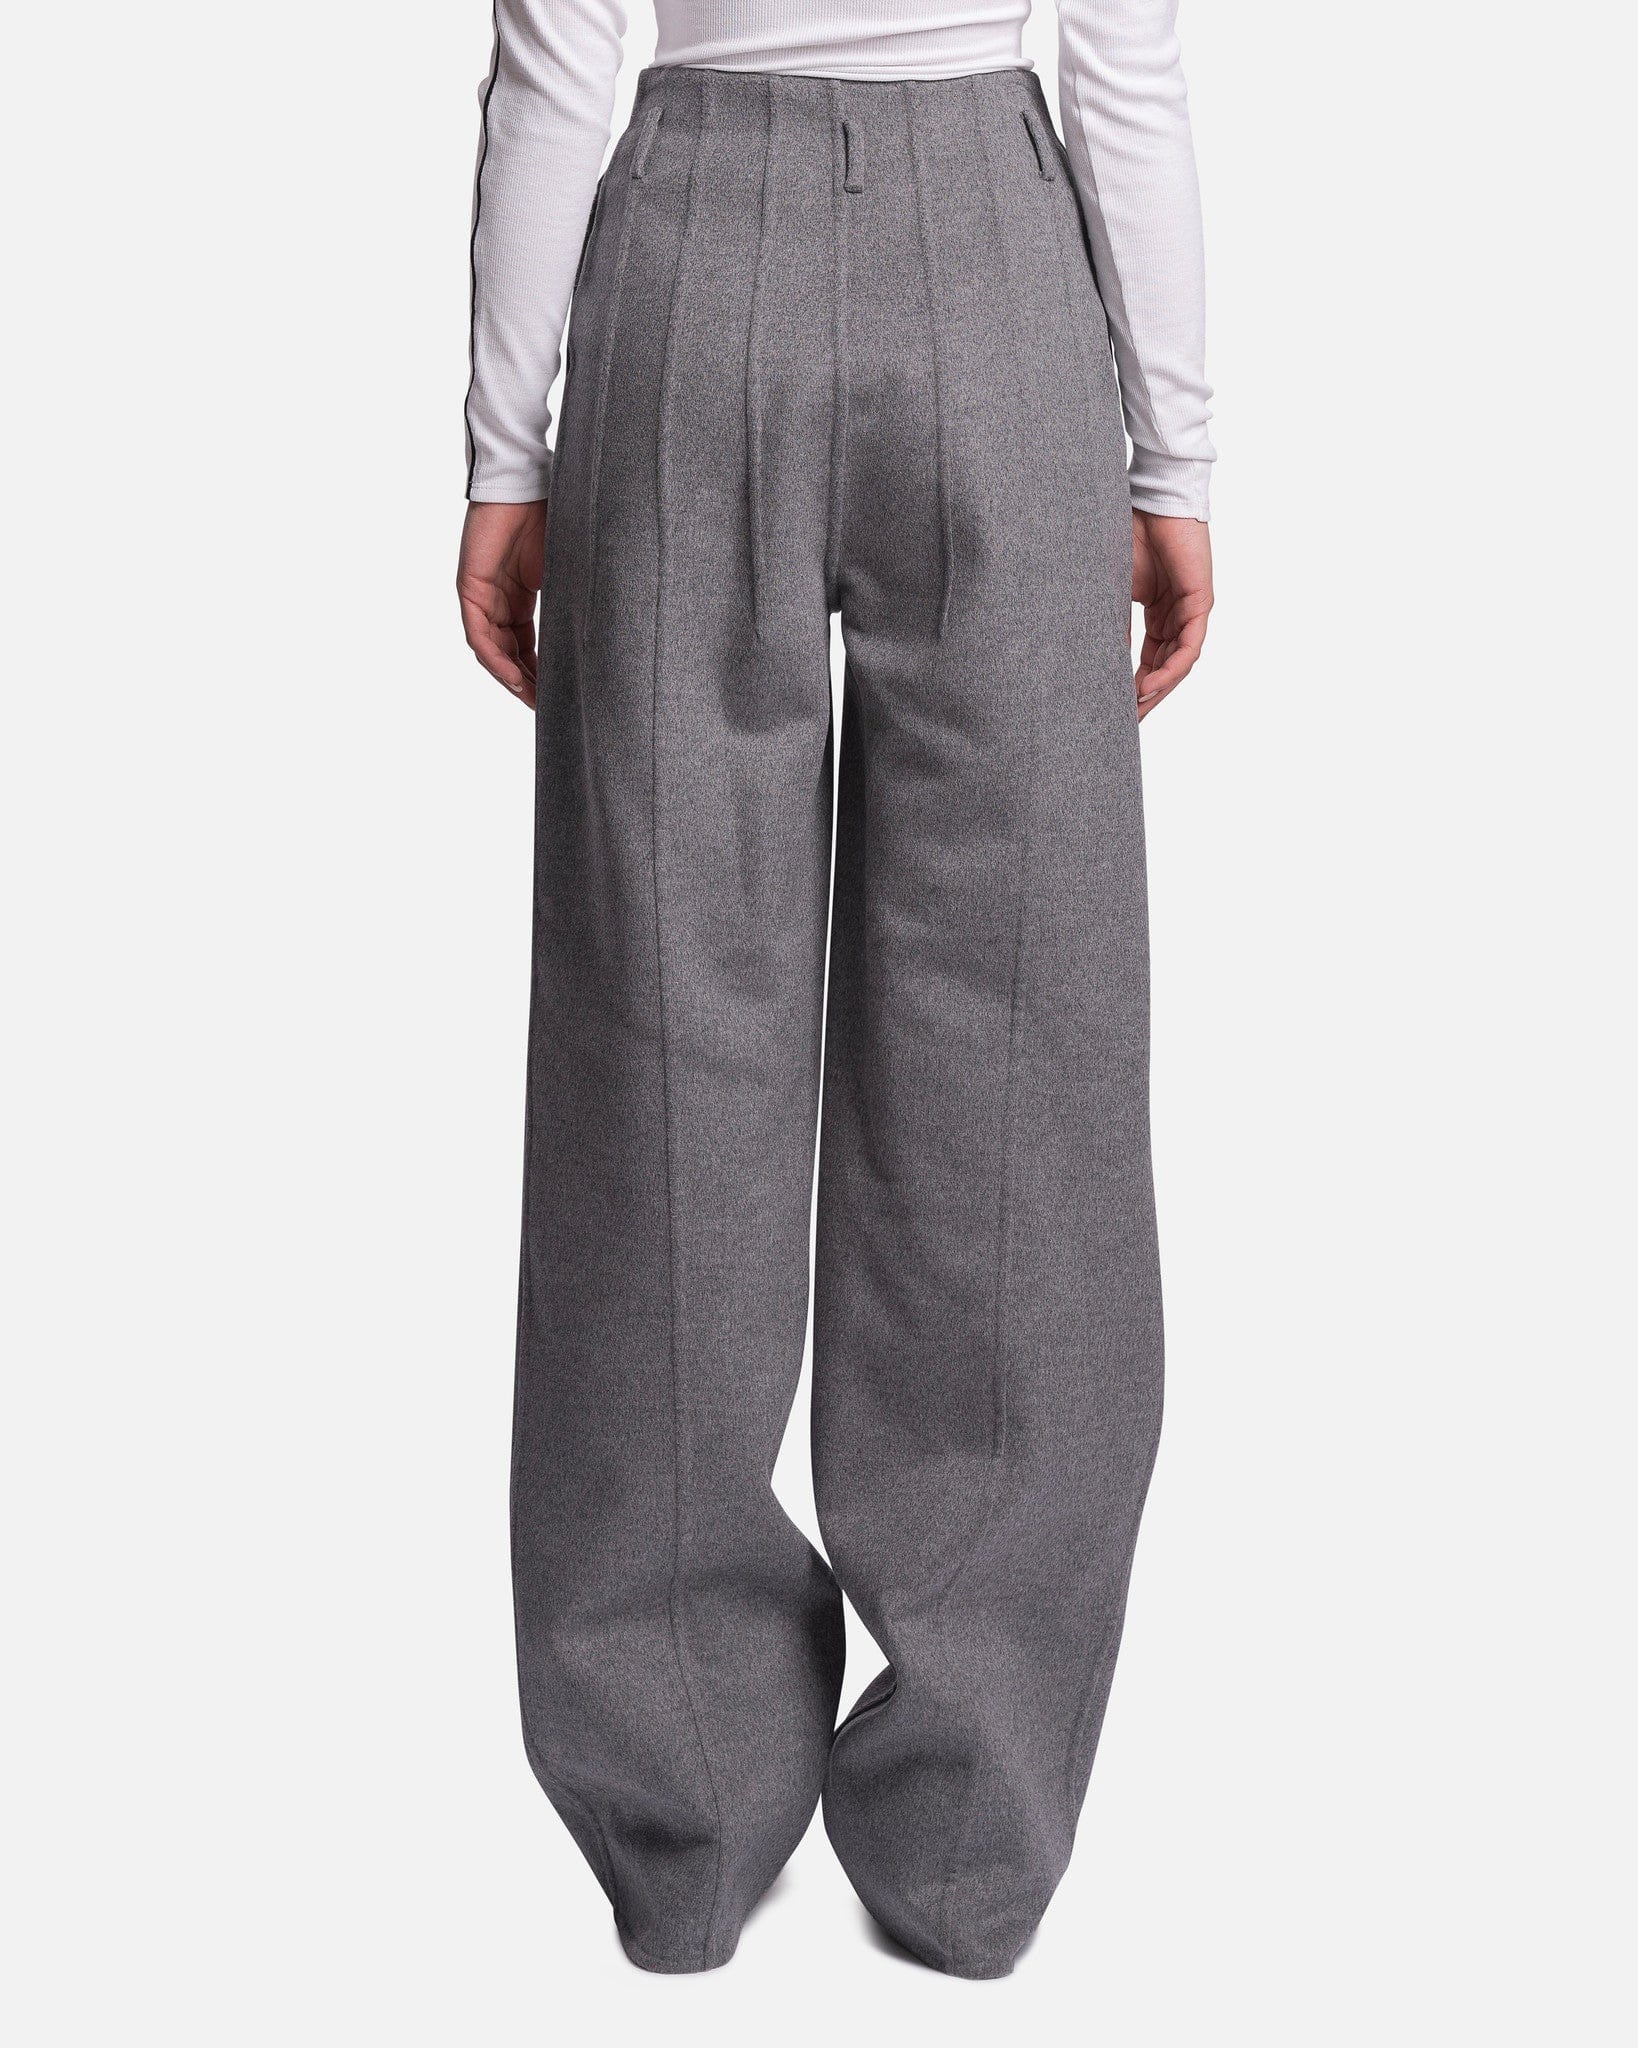 Double-Face Darted Pant in Cool Grey – SVRN